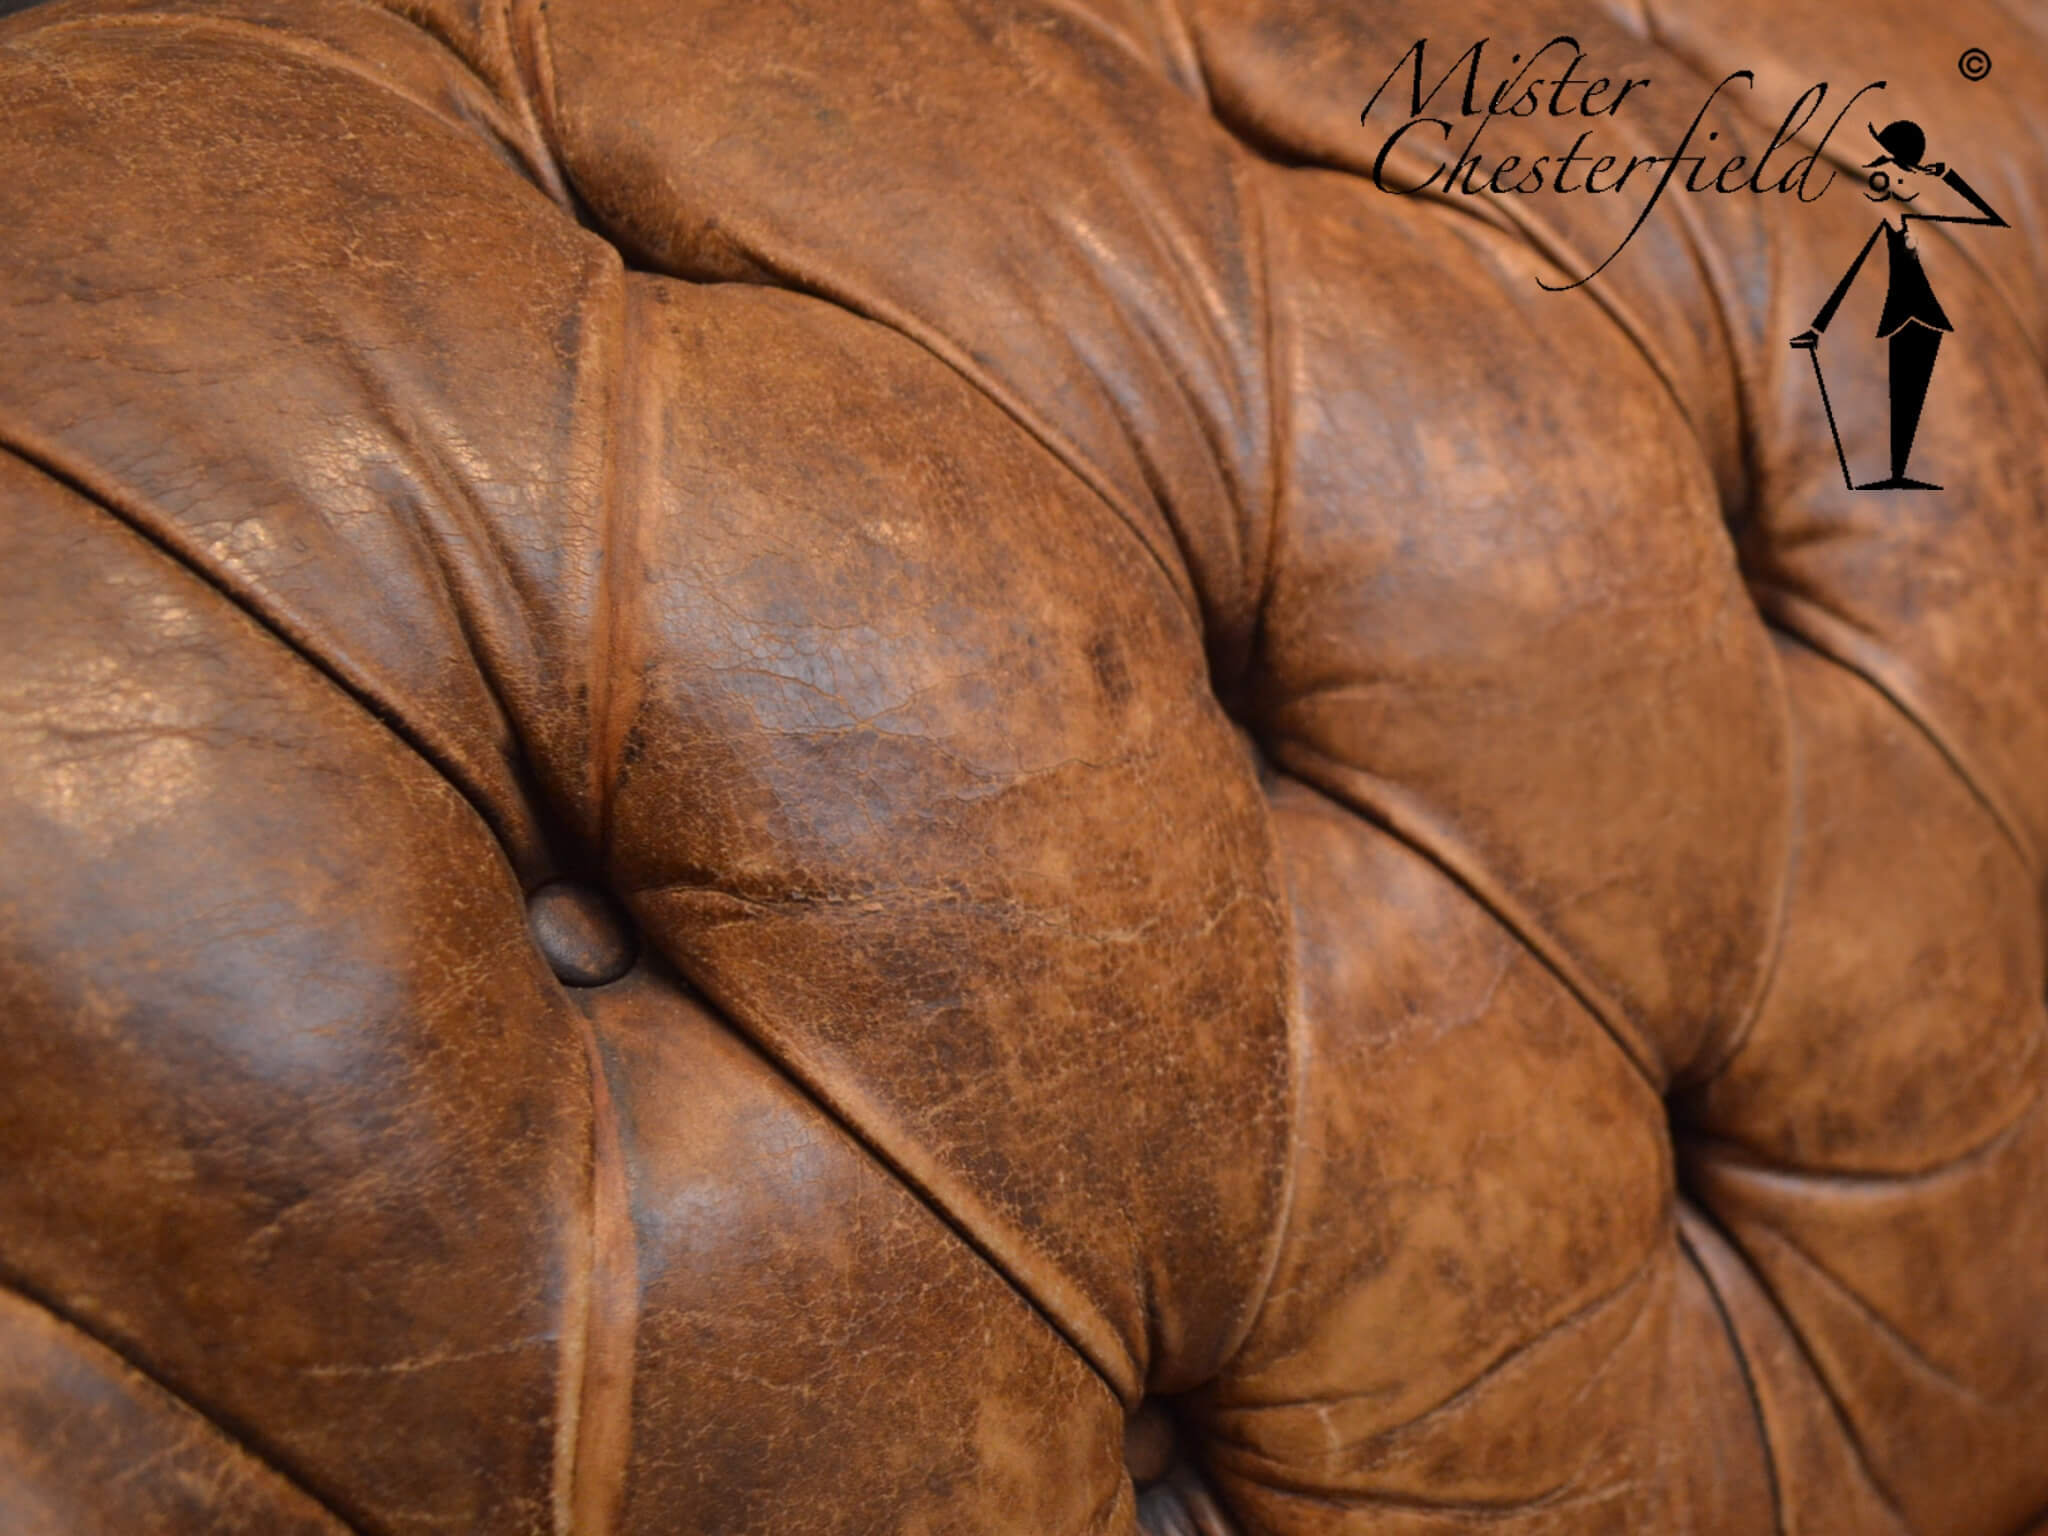 chesterfield-classic-sofa and-chairs-antique-handwish-detail-backrest (1)